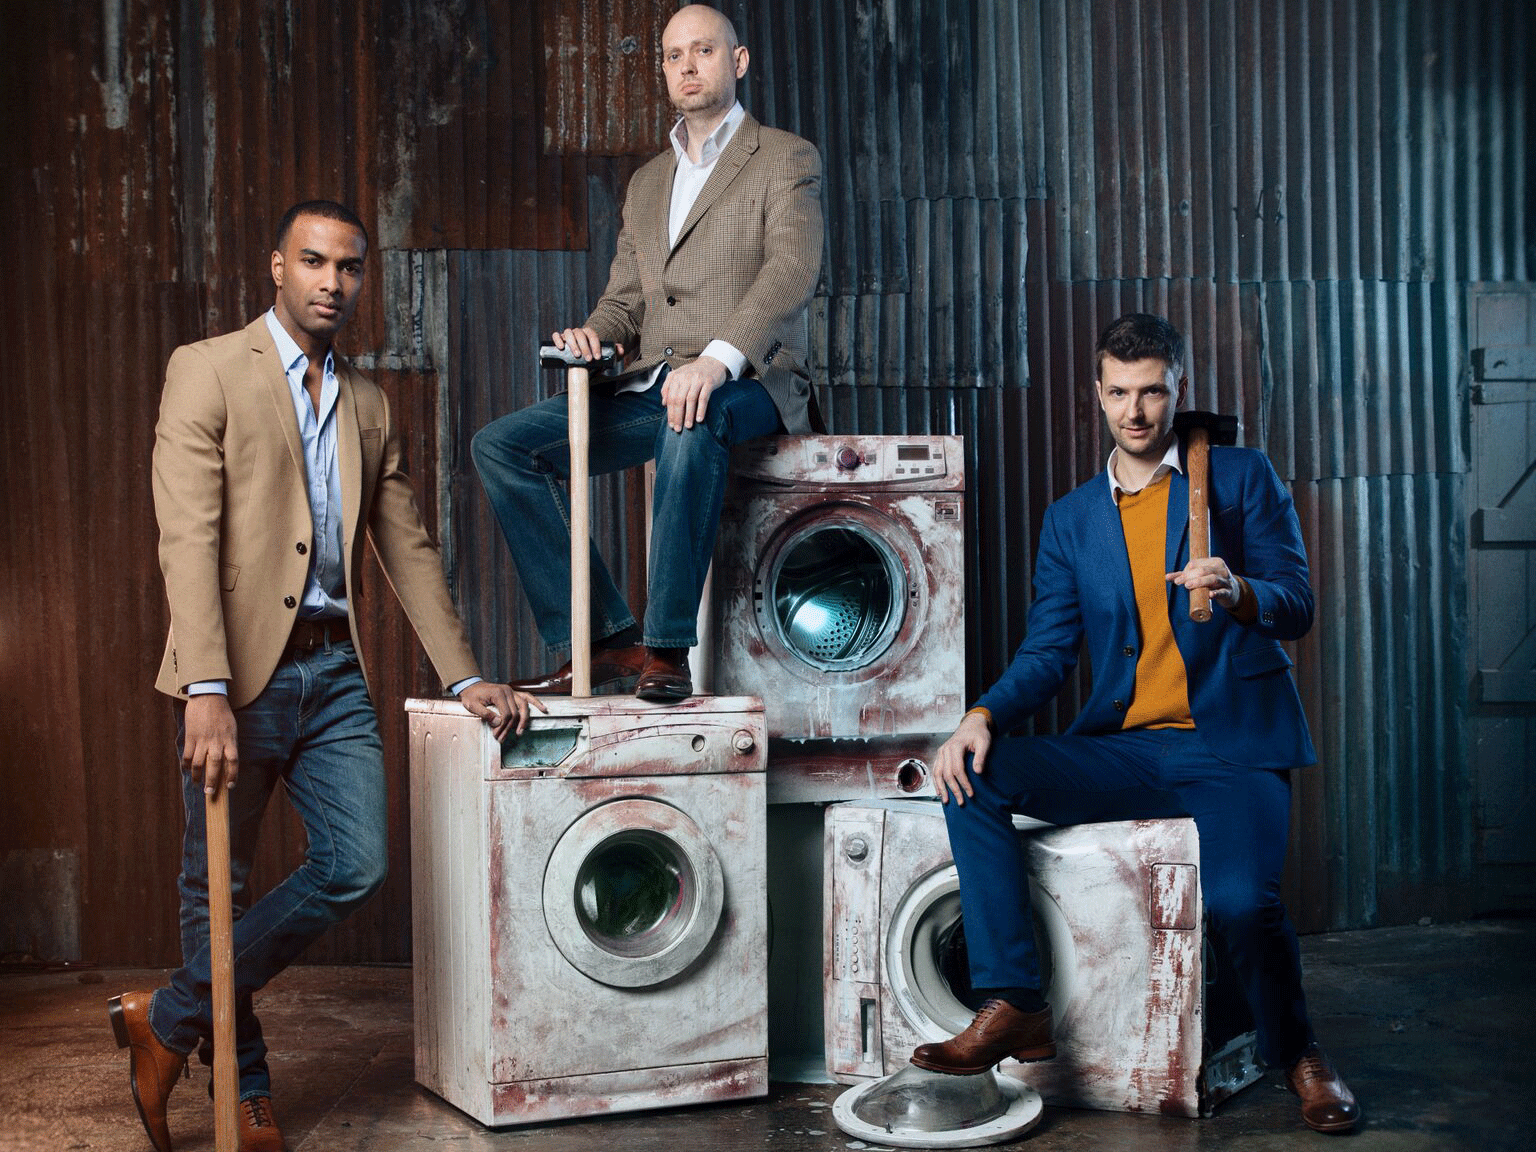 CEO and founder of Laundrapp Ed Relf (centre) wants to make the laundry industry "sexy and glamorous"